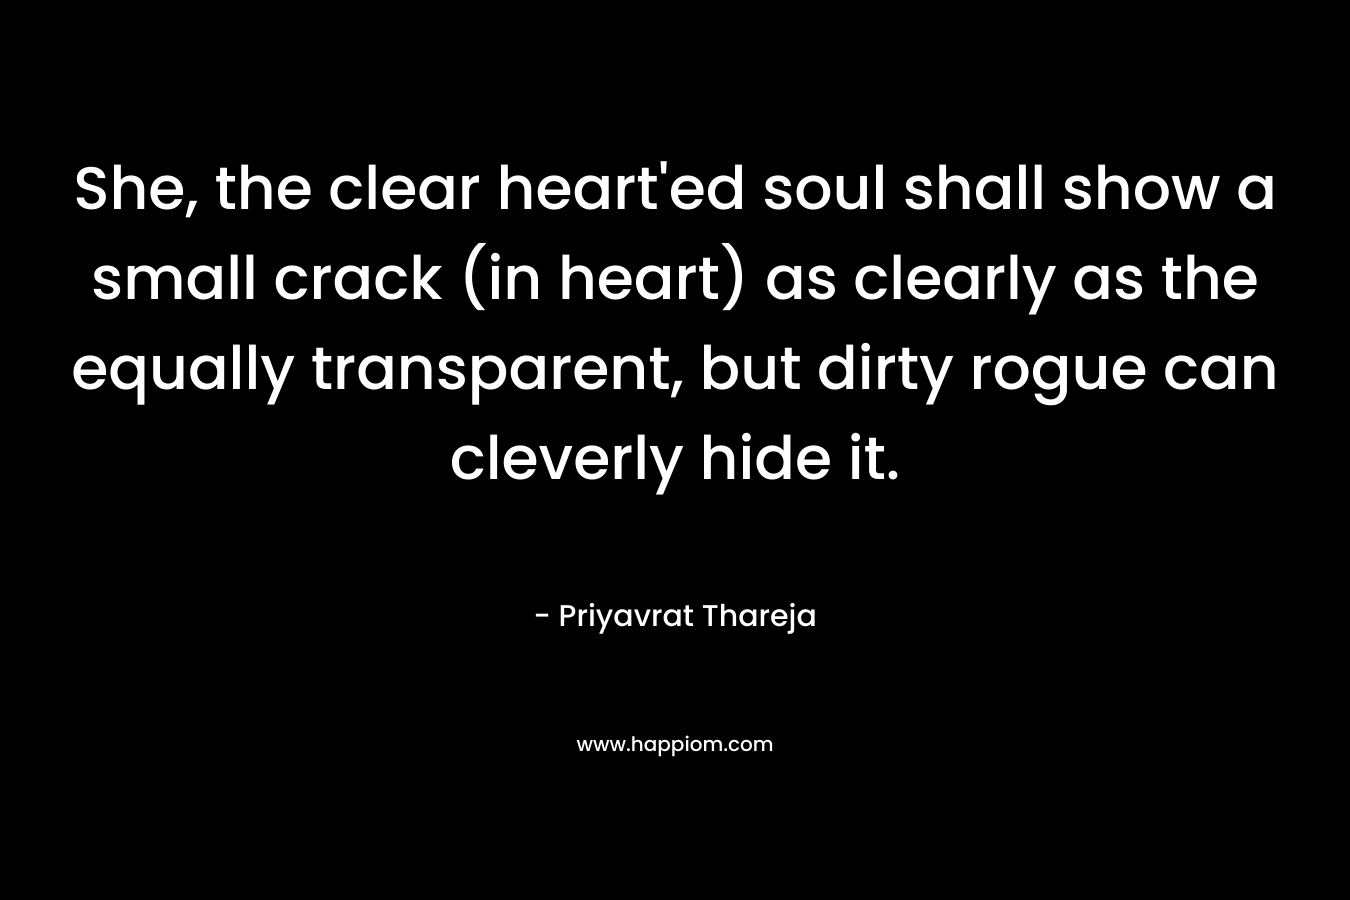 She, the clear heart'ed soul shall show a small crack (in heart) as clearly as the equally transparent, but dirty rogue can cleverly hide it.